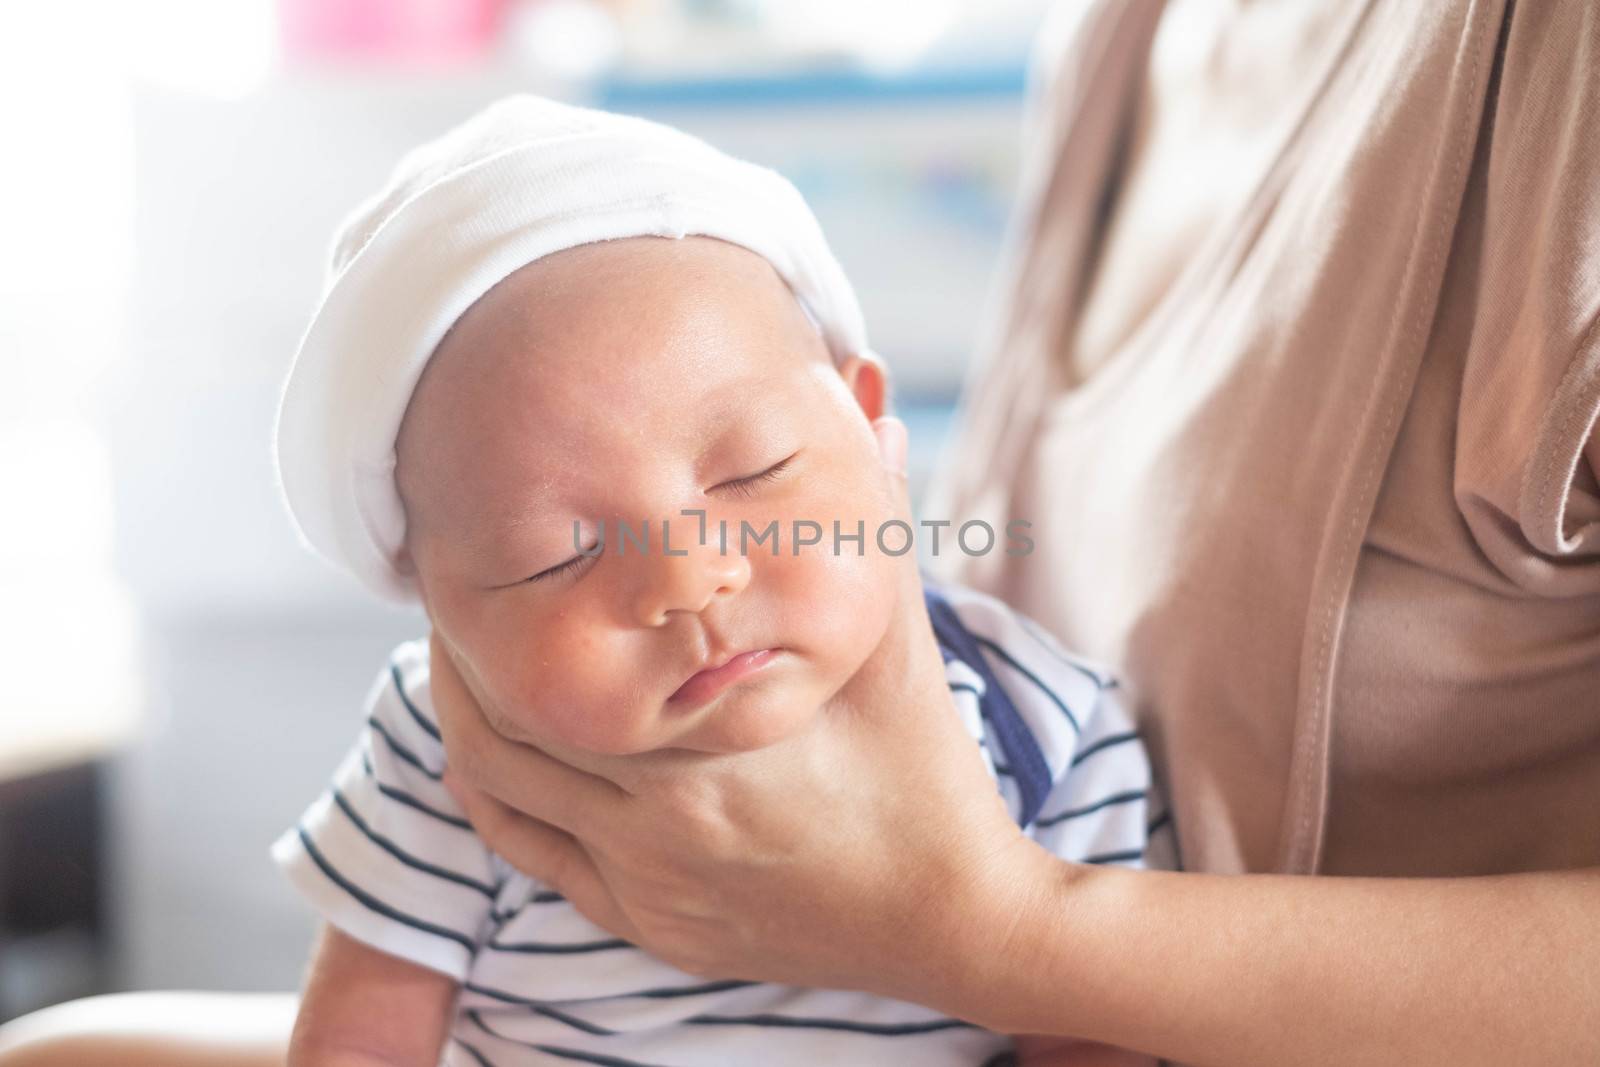 The Soft focus photo of mother, mom using hand Hold baby to help by Bonn2210